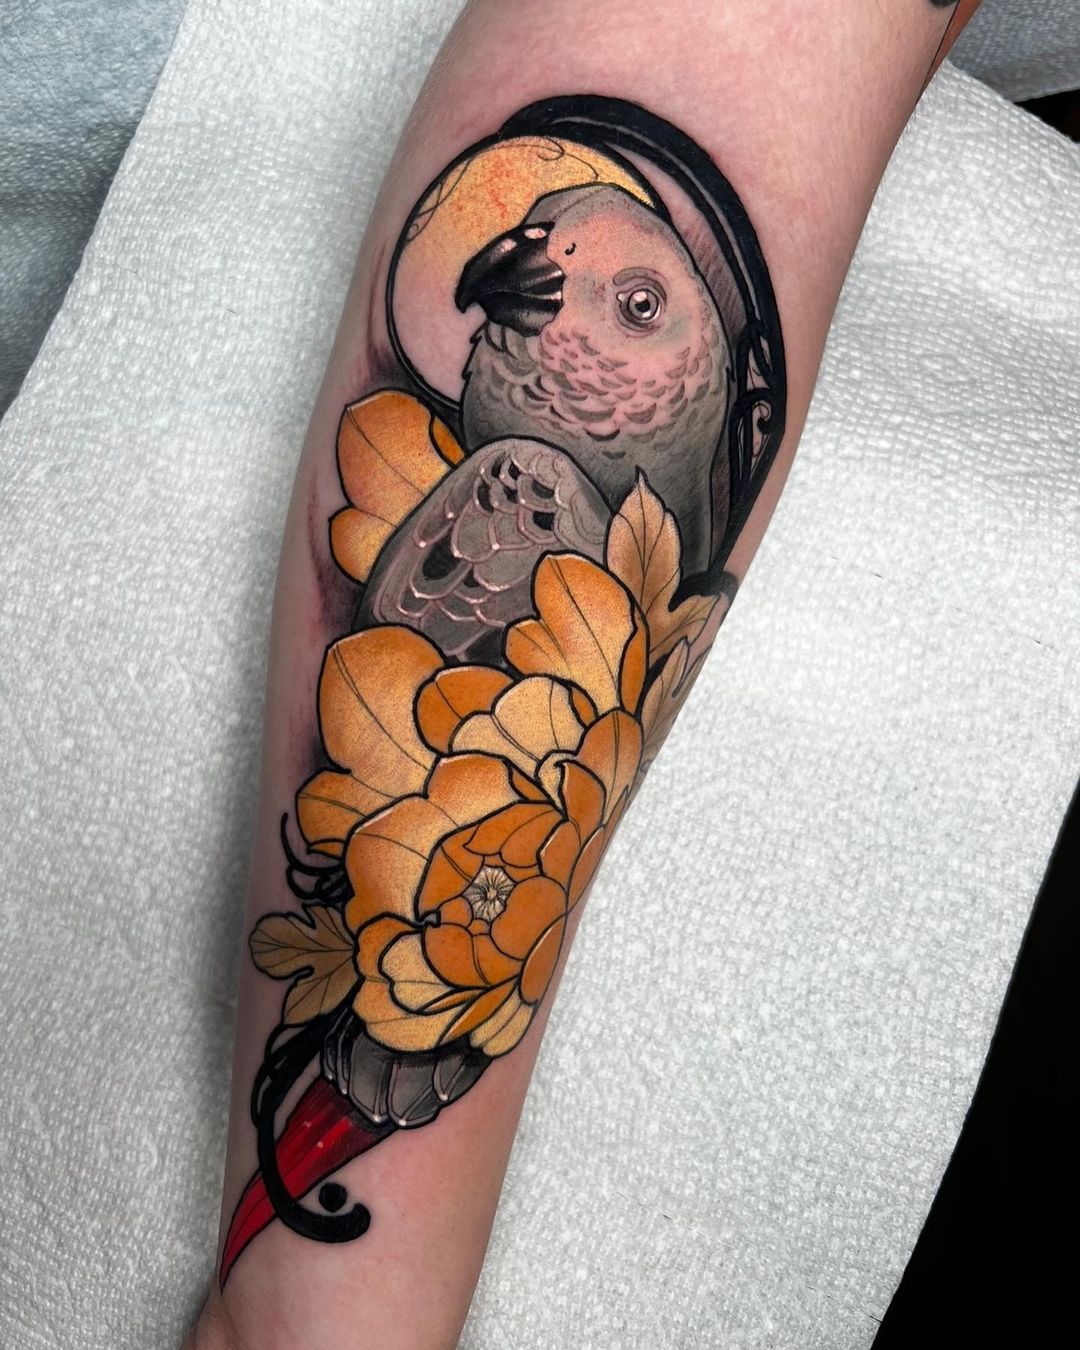 Nafanua by Chris Garcia at Kings Ave Tattoo in NYC : r/tattoos